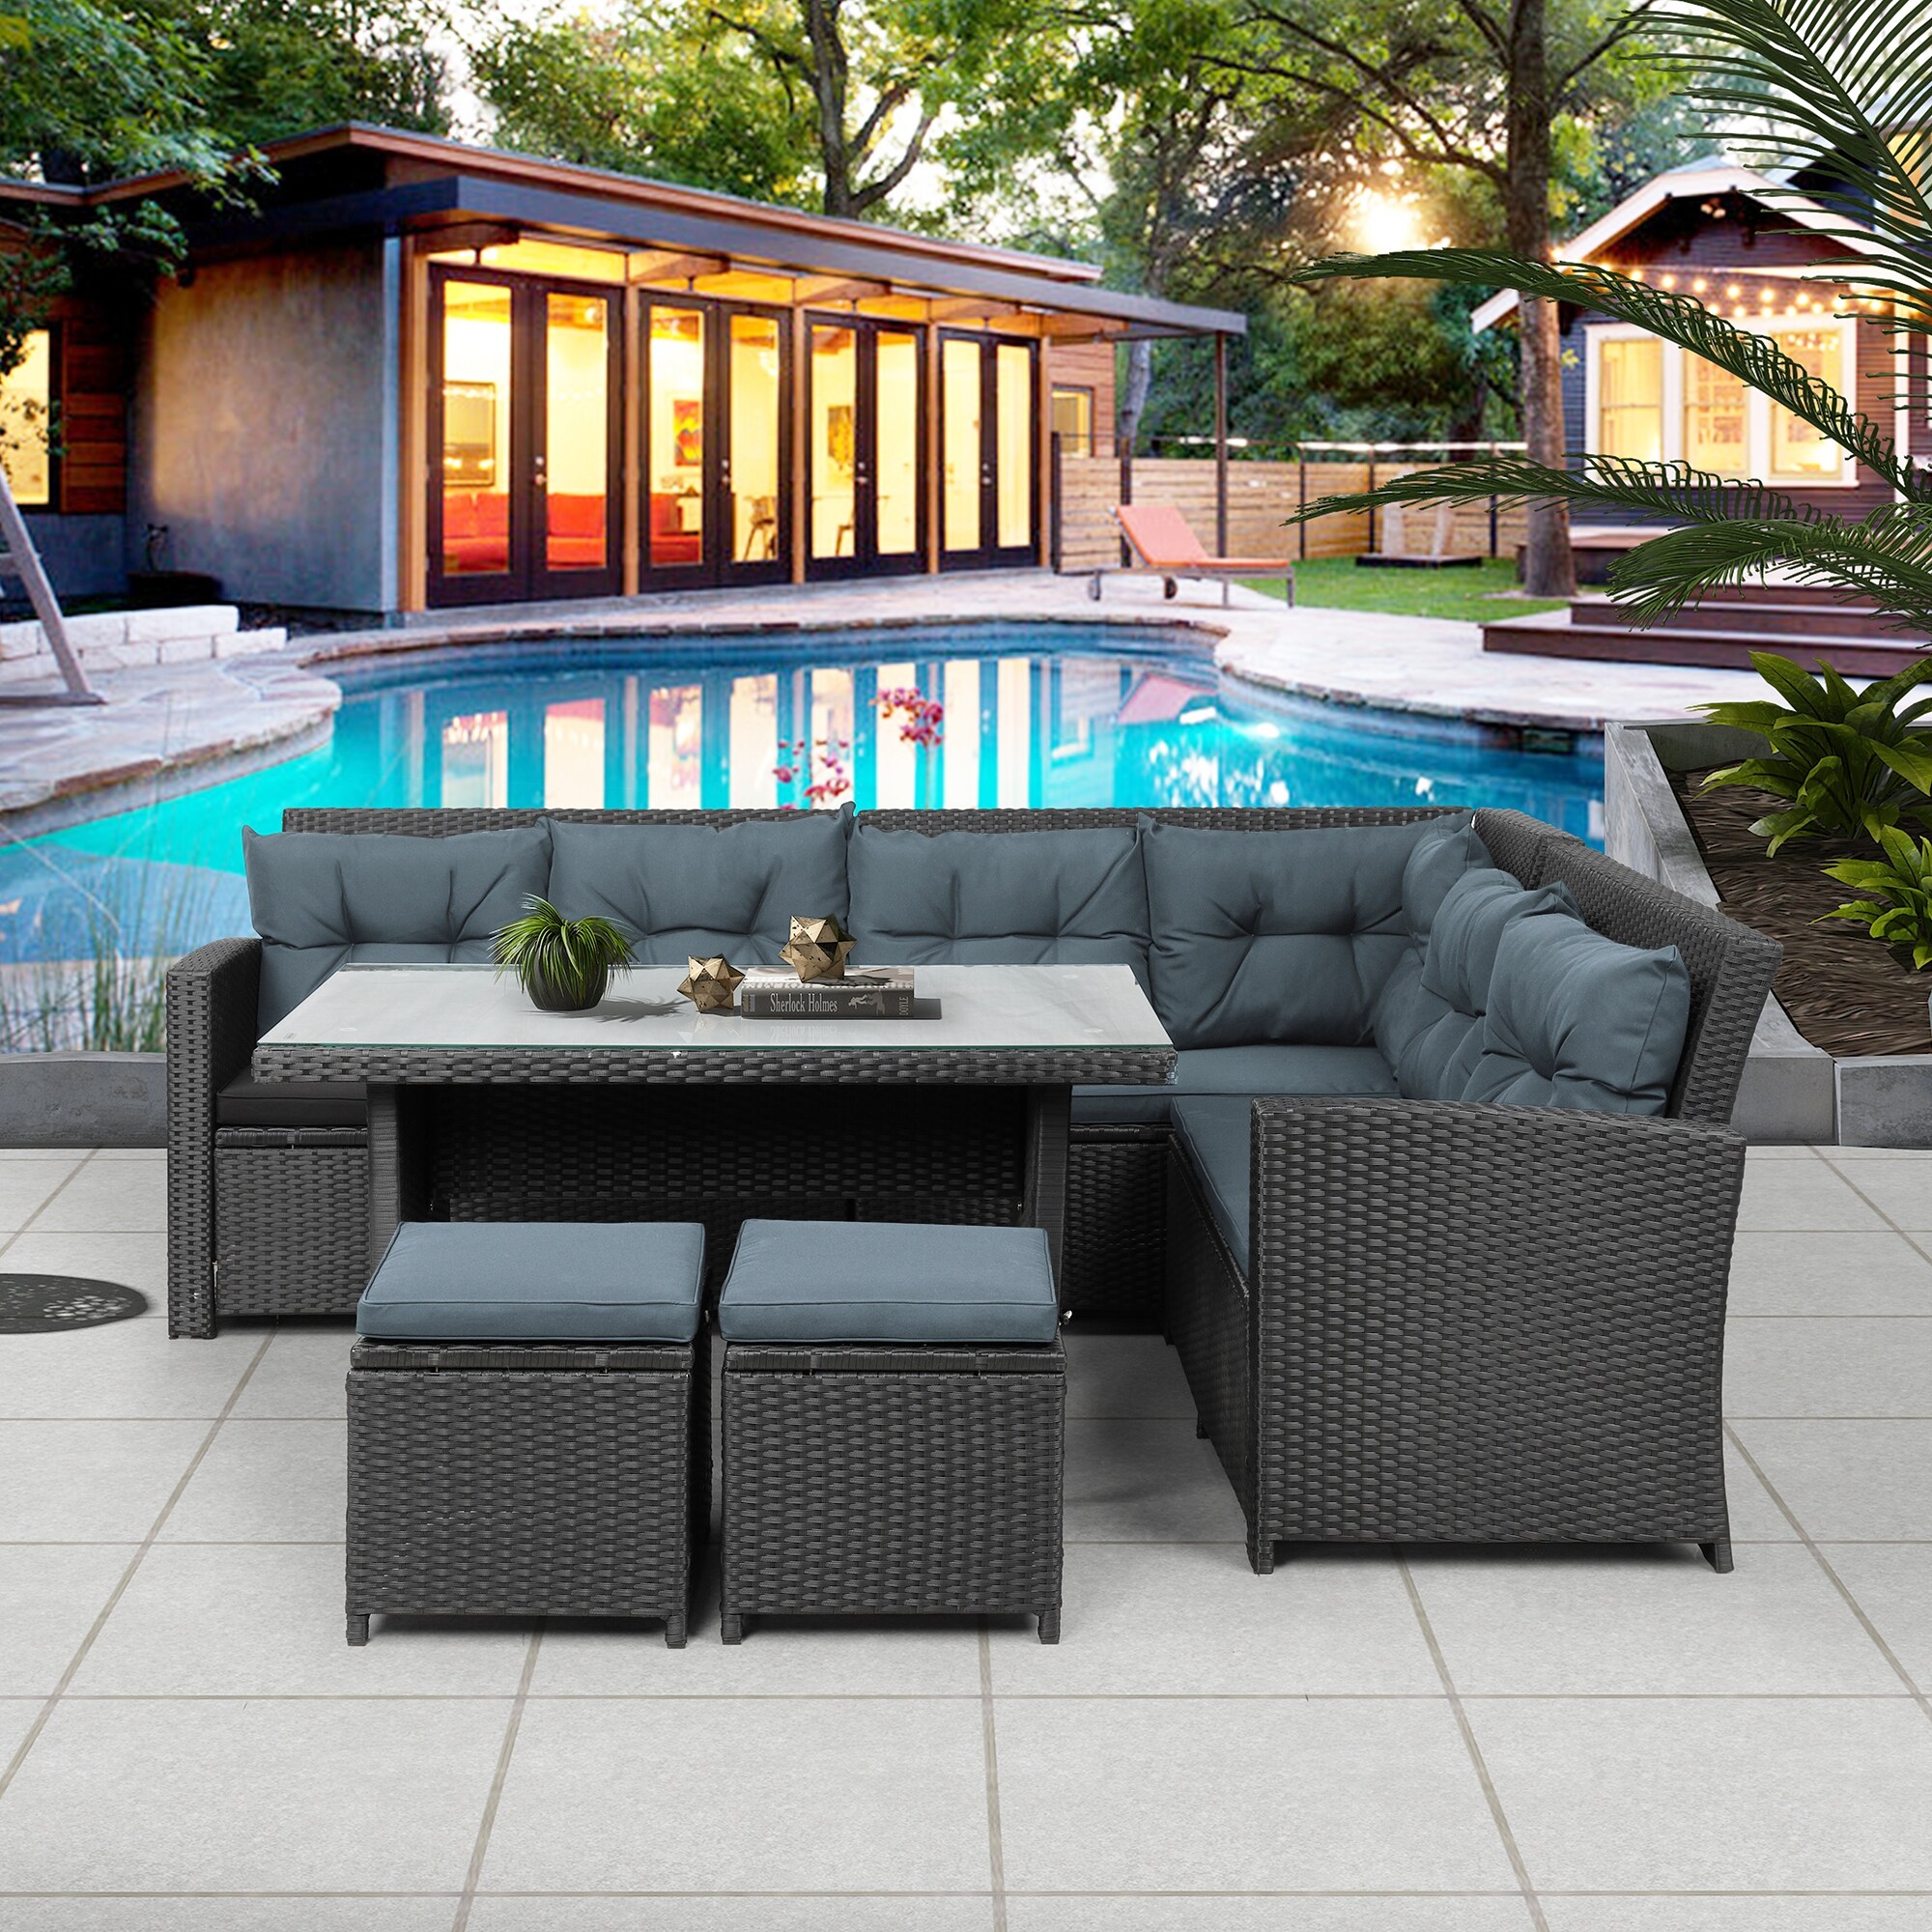 6 Pcs Patio Furniture Set Outdoor Sectional Sofa With Glass Table  Wicker Conversation Set W/ottomans For Pool  Backyard  Lawn